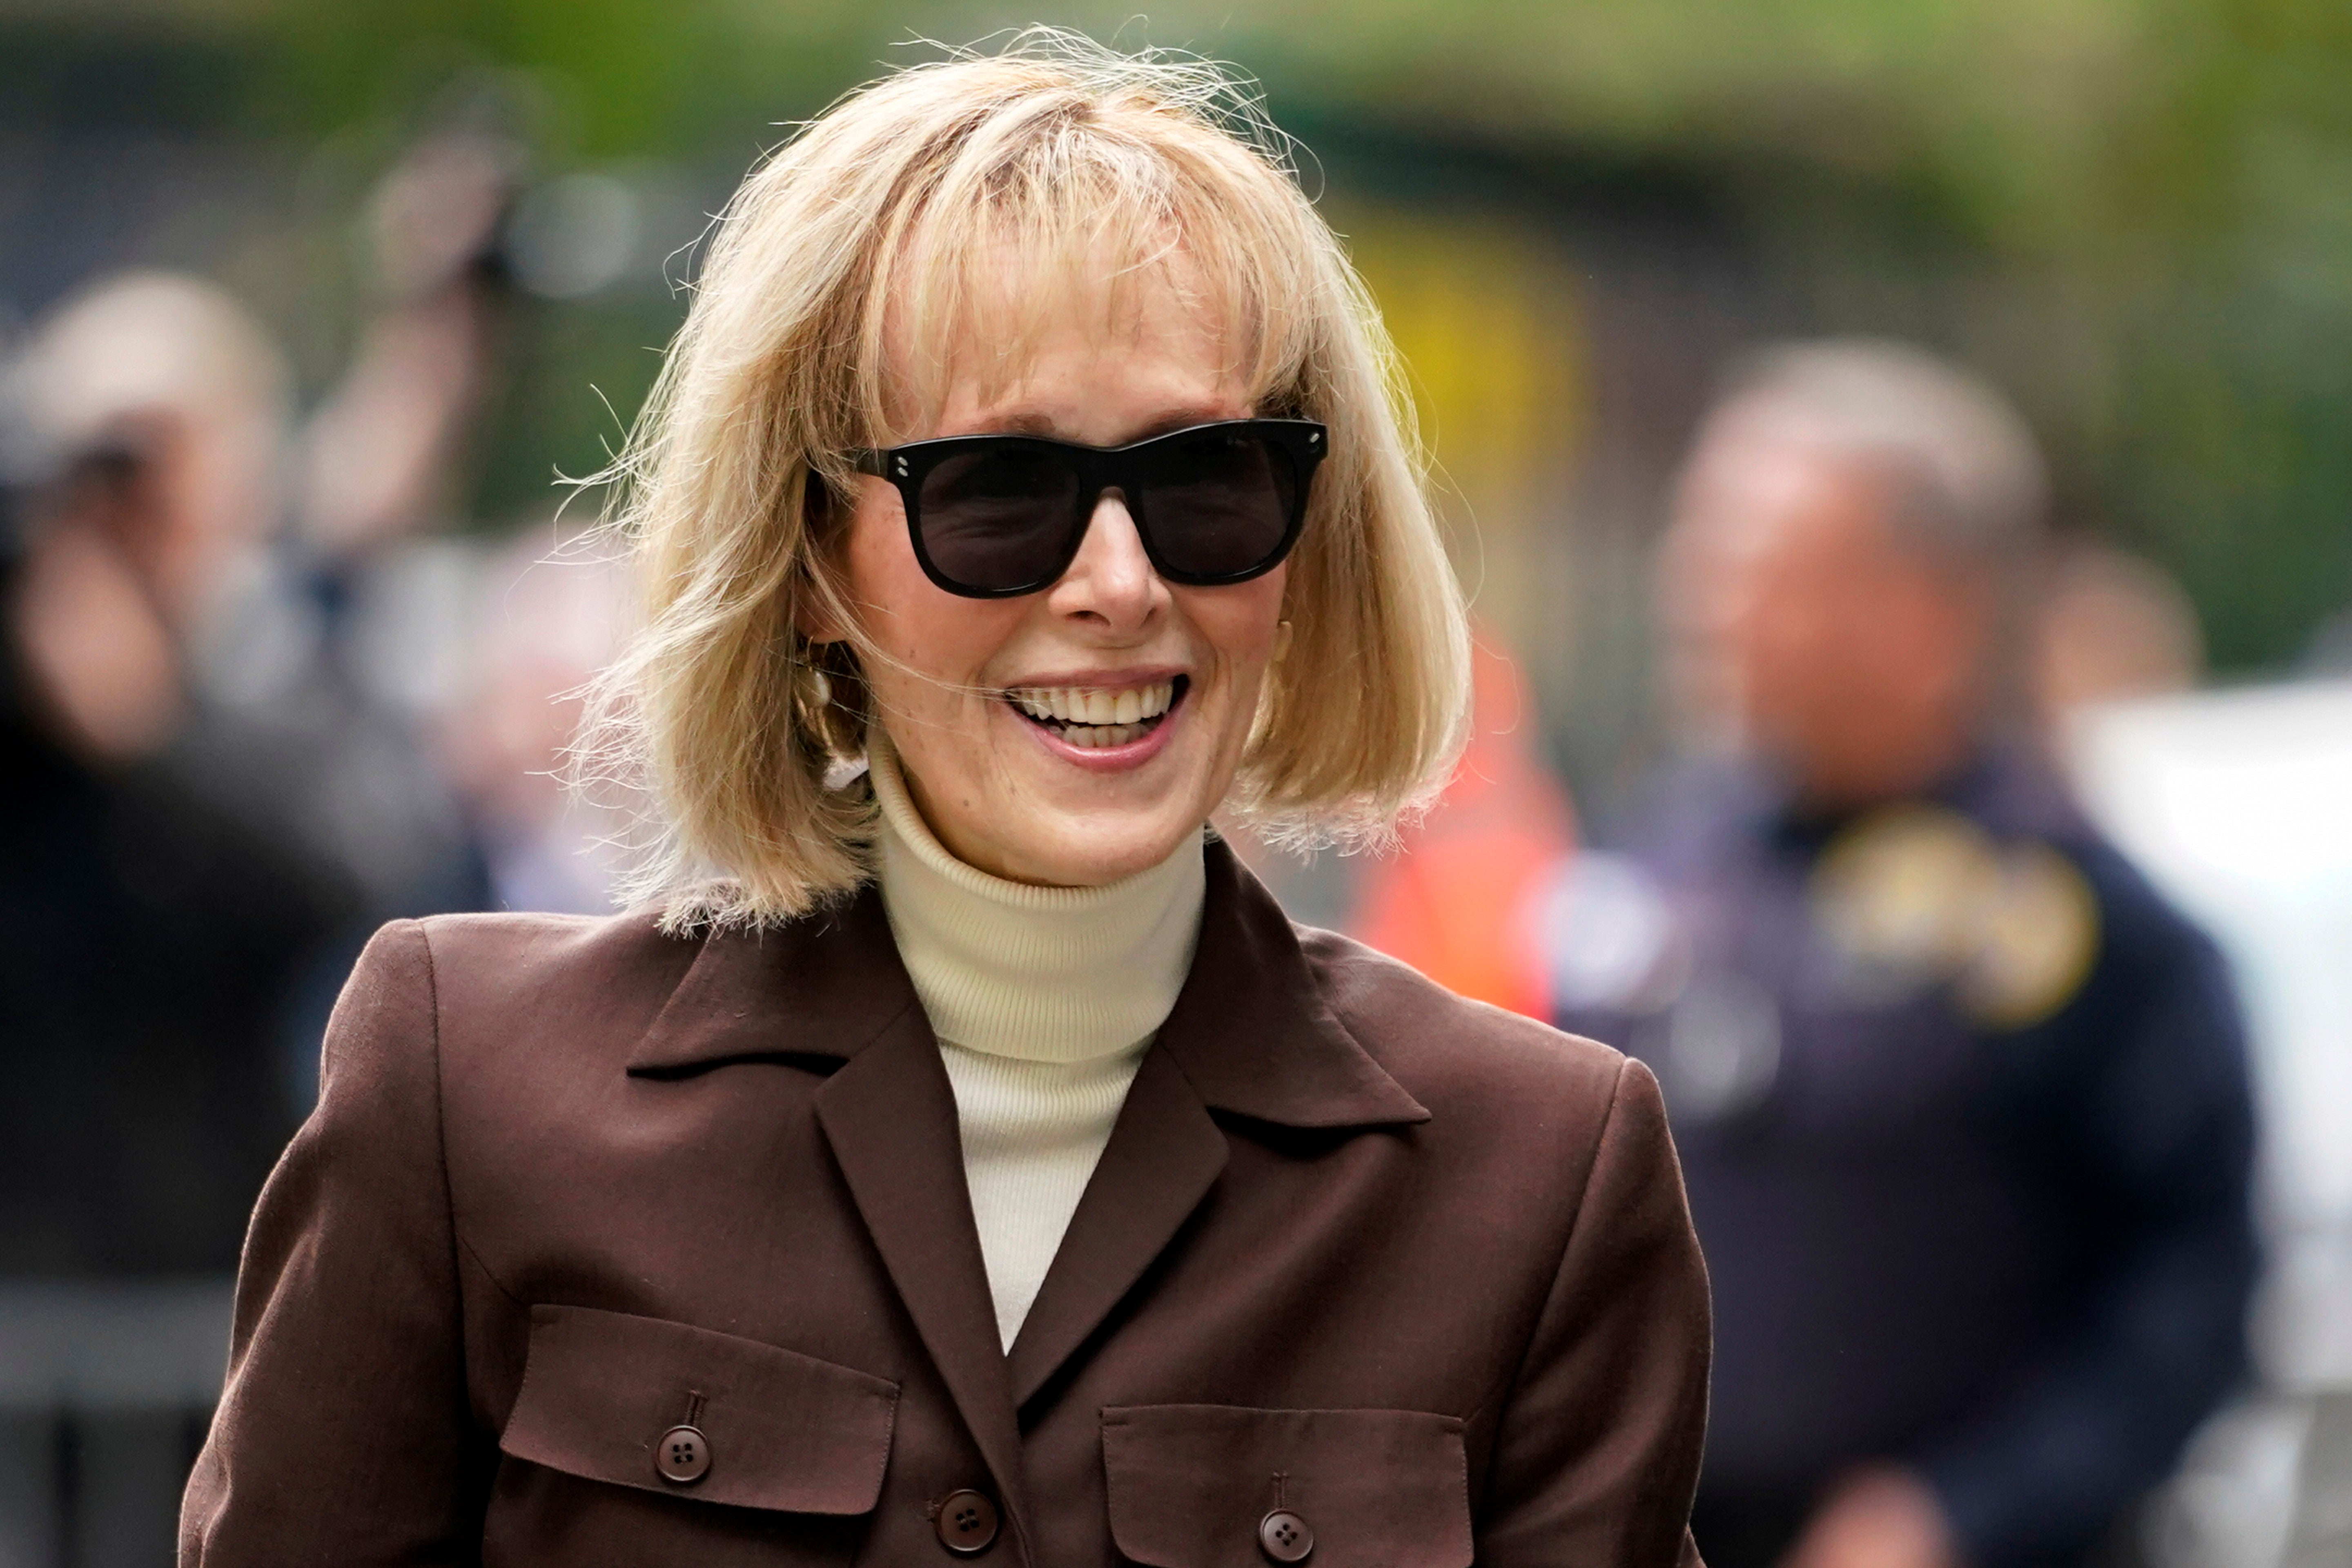 E Jean Carroll arriving at a Manhattan courthouse during her defamation trial against Donald Trump in May